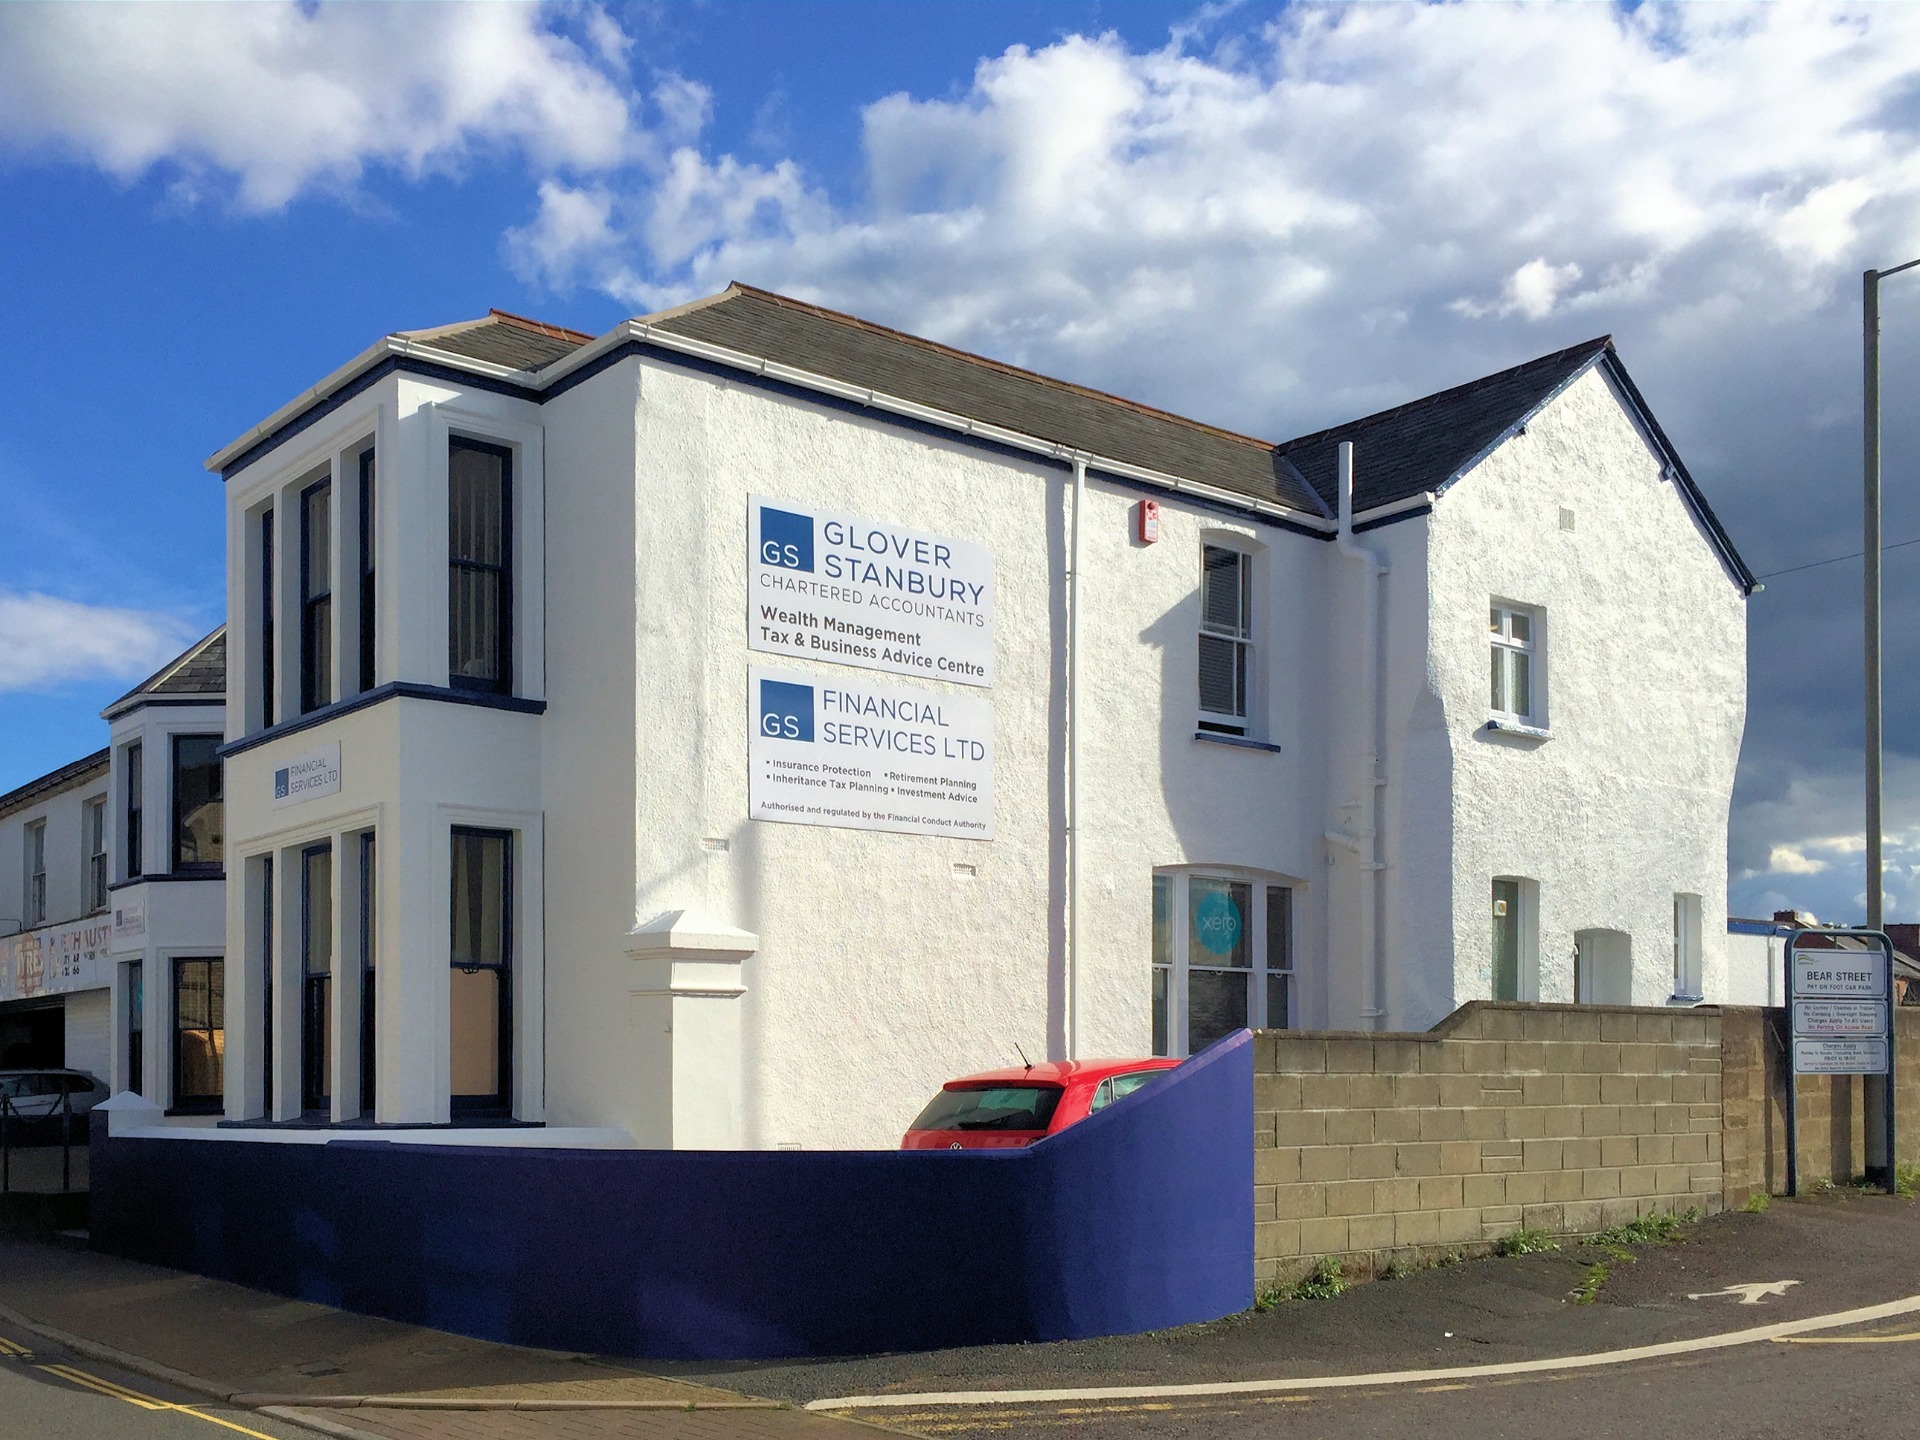 Client testimonial for the project,    “We would highly recommend MJS Building Maintenance Ltd and the excellent and professional standard of work carried out by Matt Scoins and his team at our Barnstaple Offices at 30 Bear Street.    All friendly, helpful, thorough and efficient (including turning up and carrying out all works exactly when promised!), they discovered a complete nightmare when redecorating and partial re-roofing works. This nightmare was sensitively handled and included old plaster falling off the walls in bucket loads (well skip loads - in fact) as well as a large second floor (roof supporting but rotting/leaking) bay window needing complete replacement - whilst ensuring no structural movement (roof falling in) or other related health and safety issues. A very significant job for us undertaken in a constructive and efficient way – and with no shocks financially either.    Can’t recommend them enough. Our grateful thanks.”    Brian Ross  Partner  Glover Stanbury Chartered Accountants